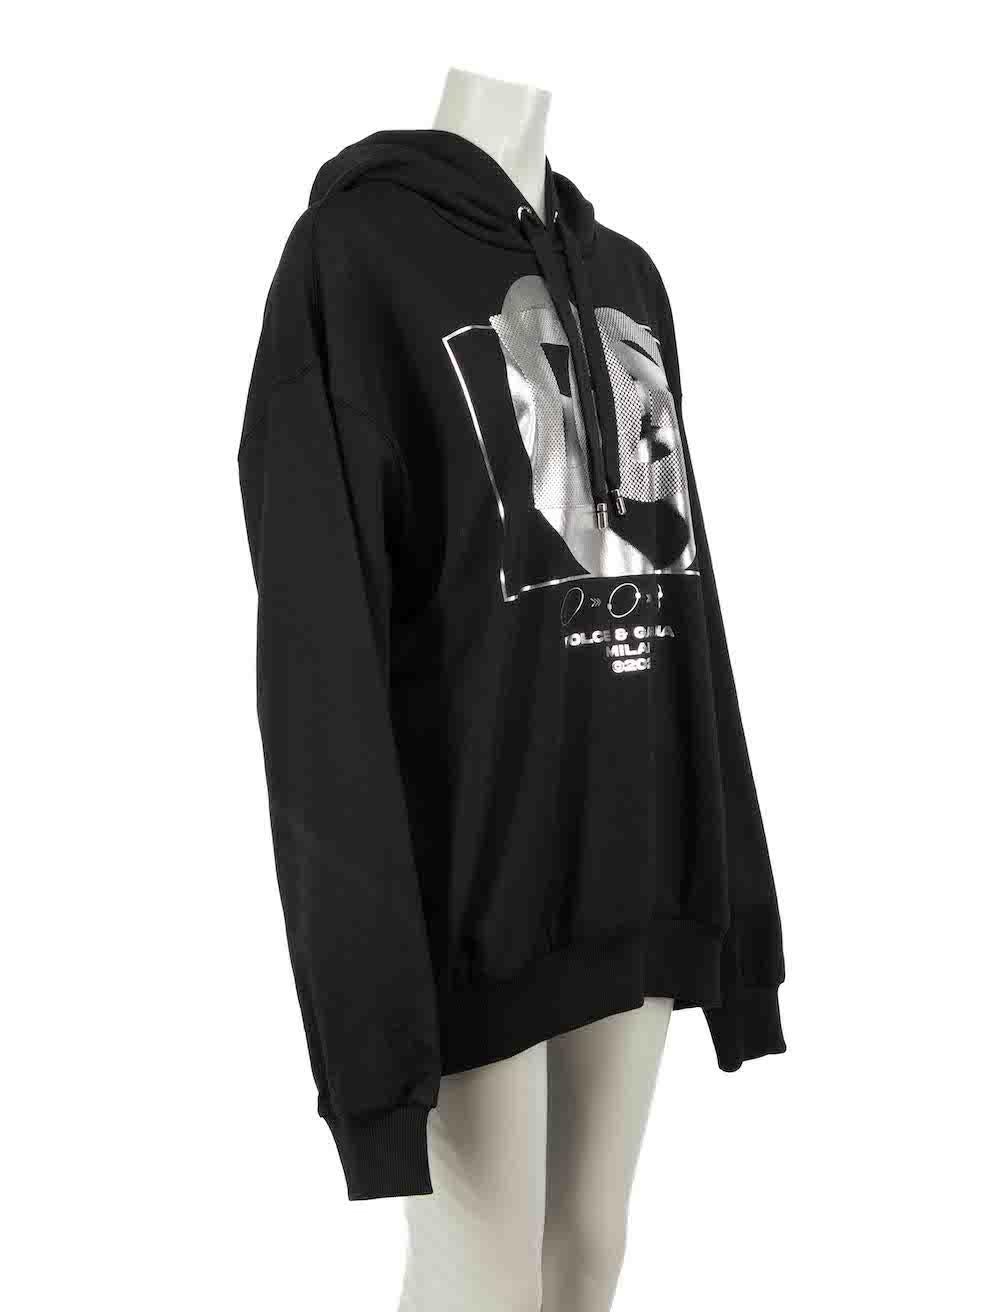 CONDITION is Never worn, with tags. No visible wear to sweatshirt is evident on this new Dolce & Gabbana designer resale item.
 
Details
Unisex
Black
Cotton
Long sleeves hoodie
Oversized fit
Platinum drip graphic print
Hooded with drawstring

Made